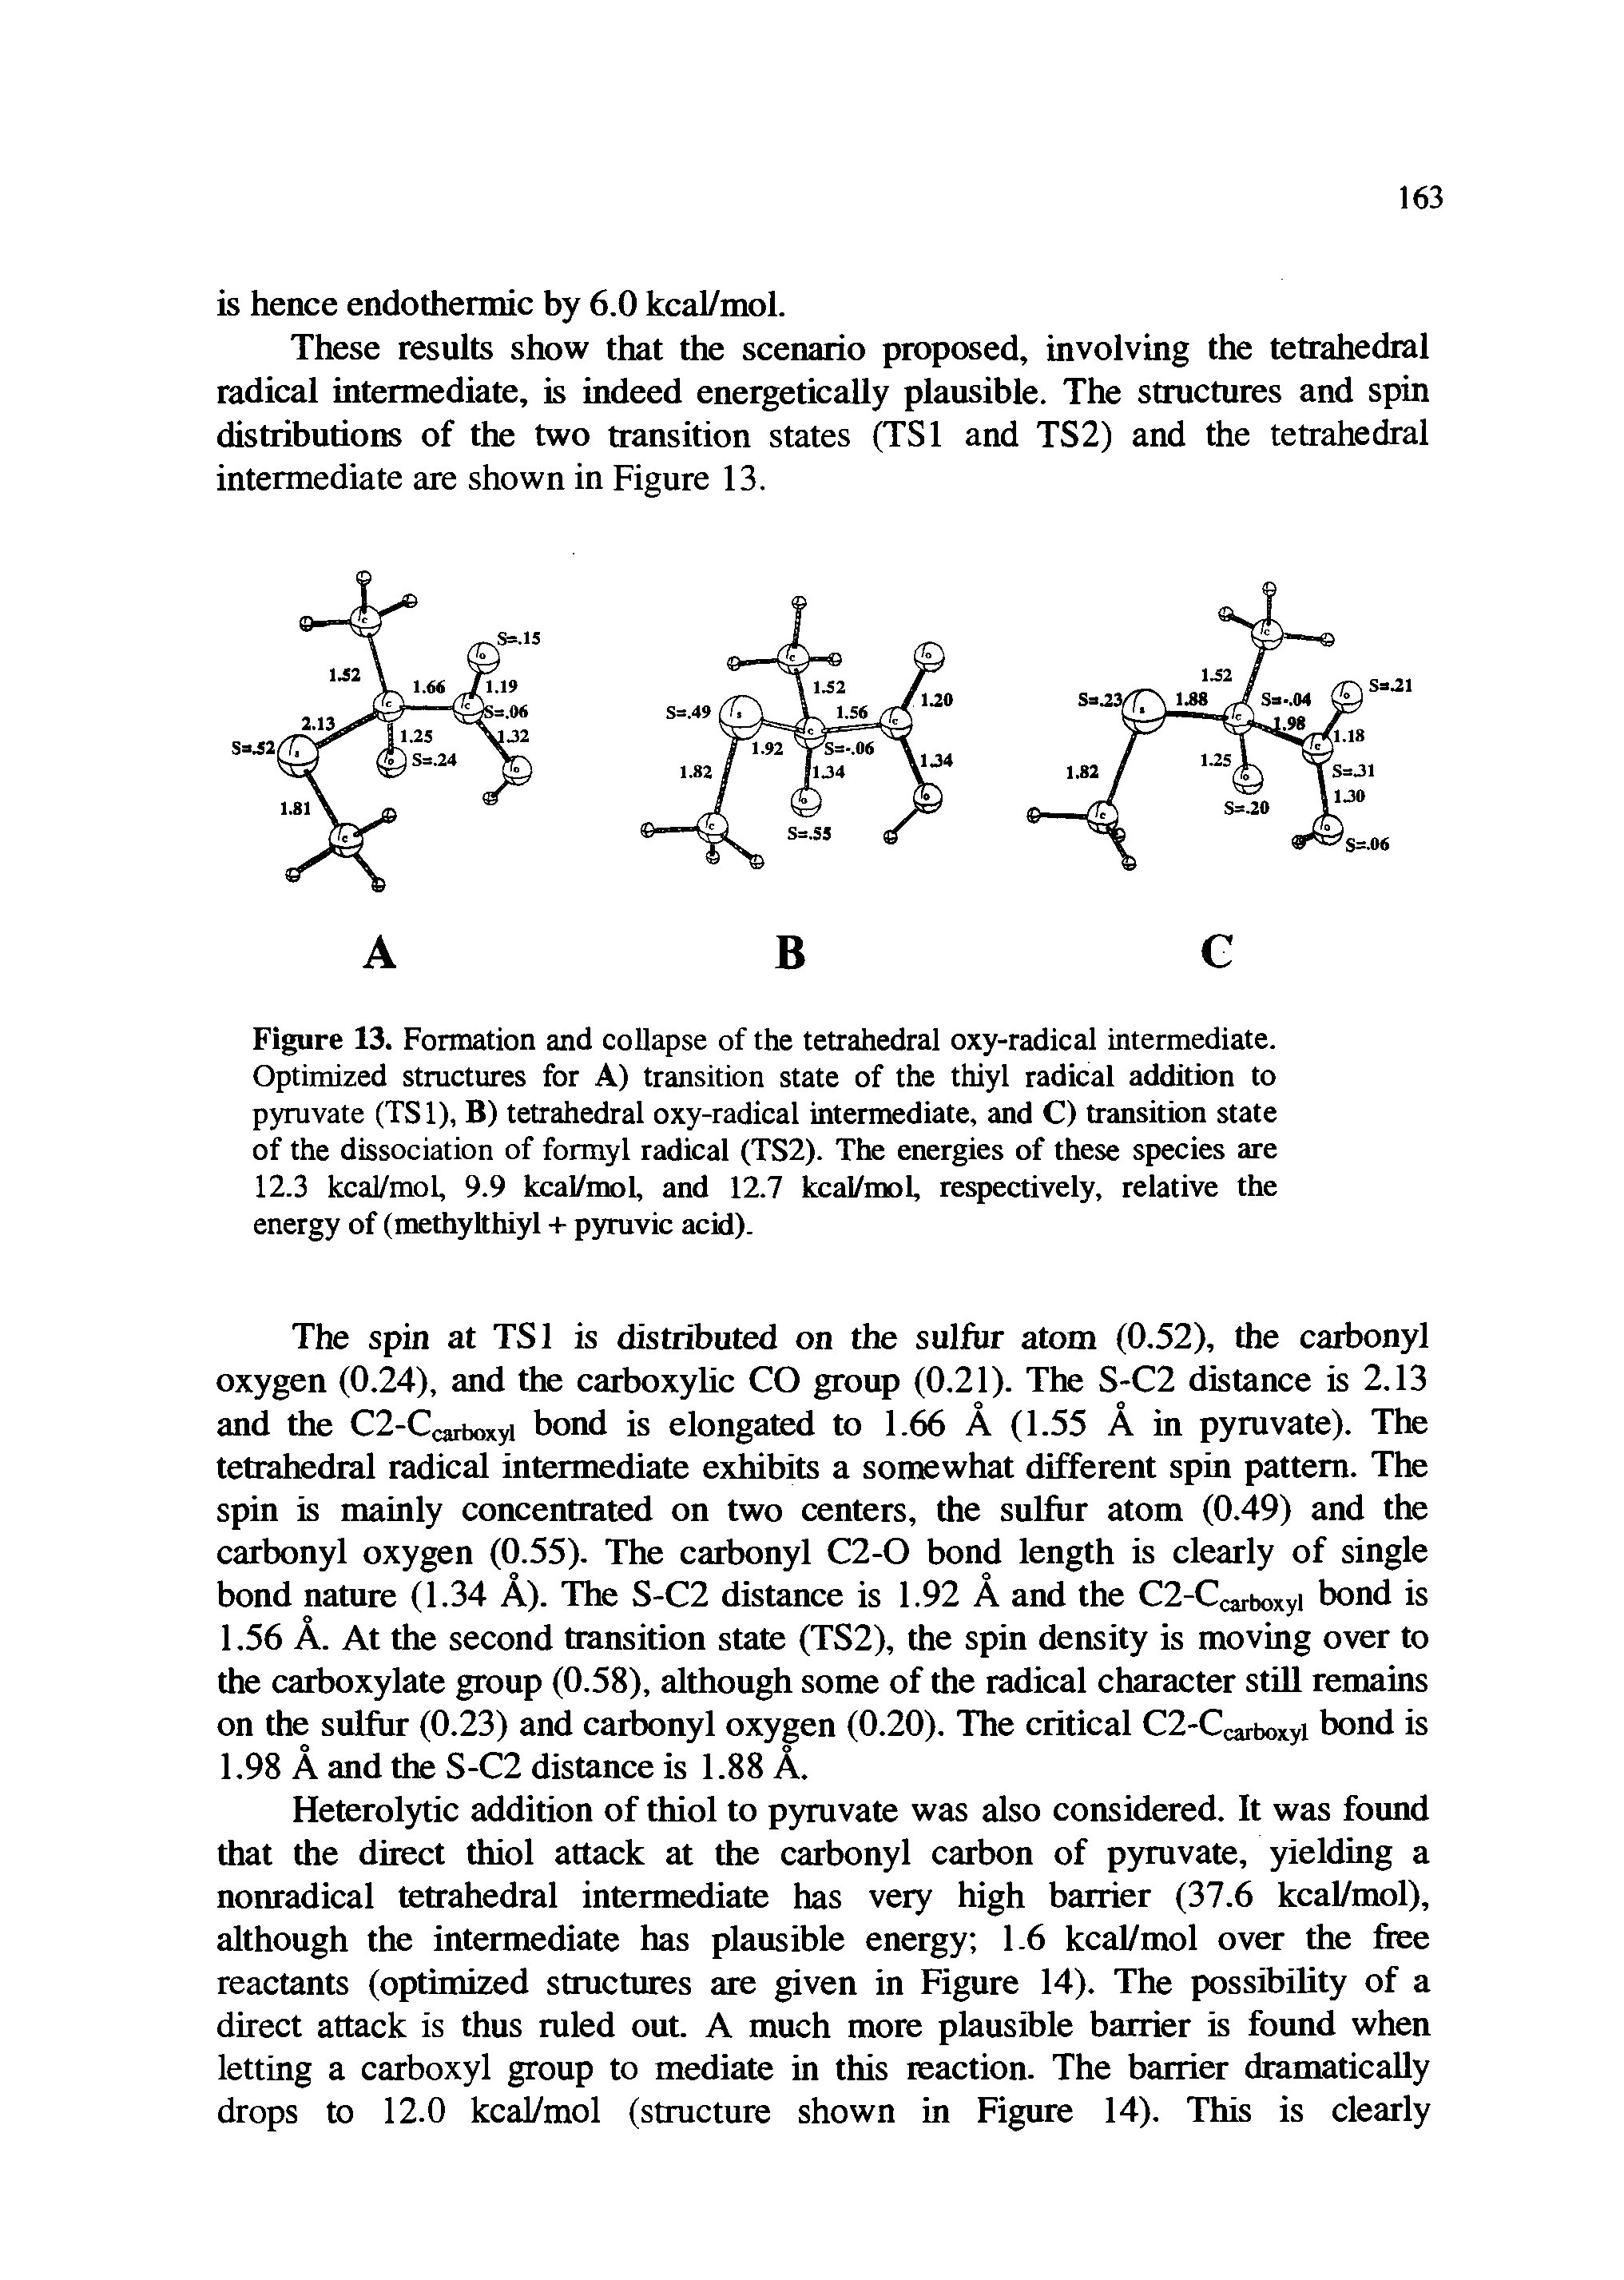 Figure 13. Formation and collapse of the tetrahedral oxy-radical intermediate. Optimized structures for A) transition state of the thiyl radical addition to pyruvate (TSl), B) tetrahedral oxy-radical intermediate, and C) transition state of the dissociation of formyl radical (TS2). The energies of these species are 12.3 kcal/mol, 9.9 kcal/mol, and 12.7 kcal/mol, respectively, relative the energy of (methylthiyl + pyruvic acid).